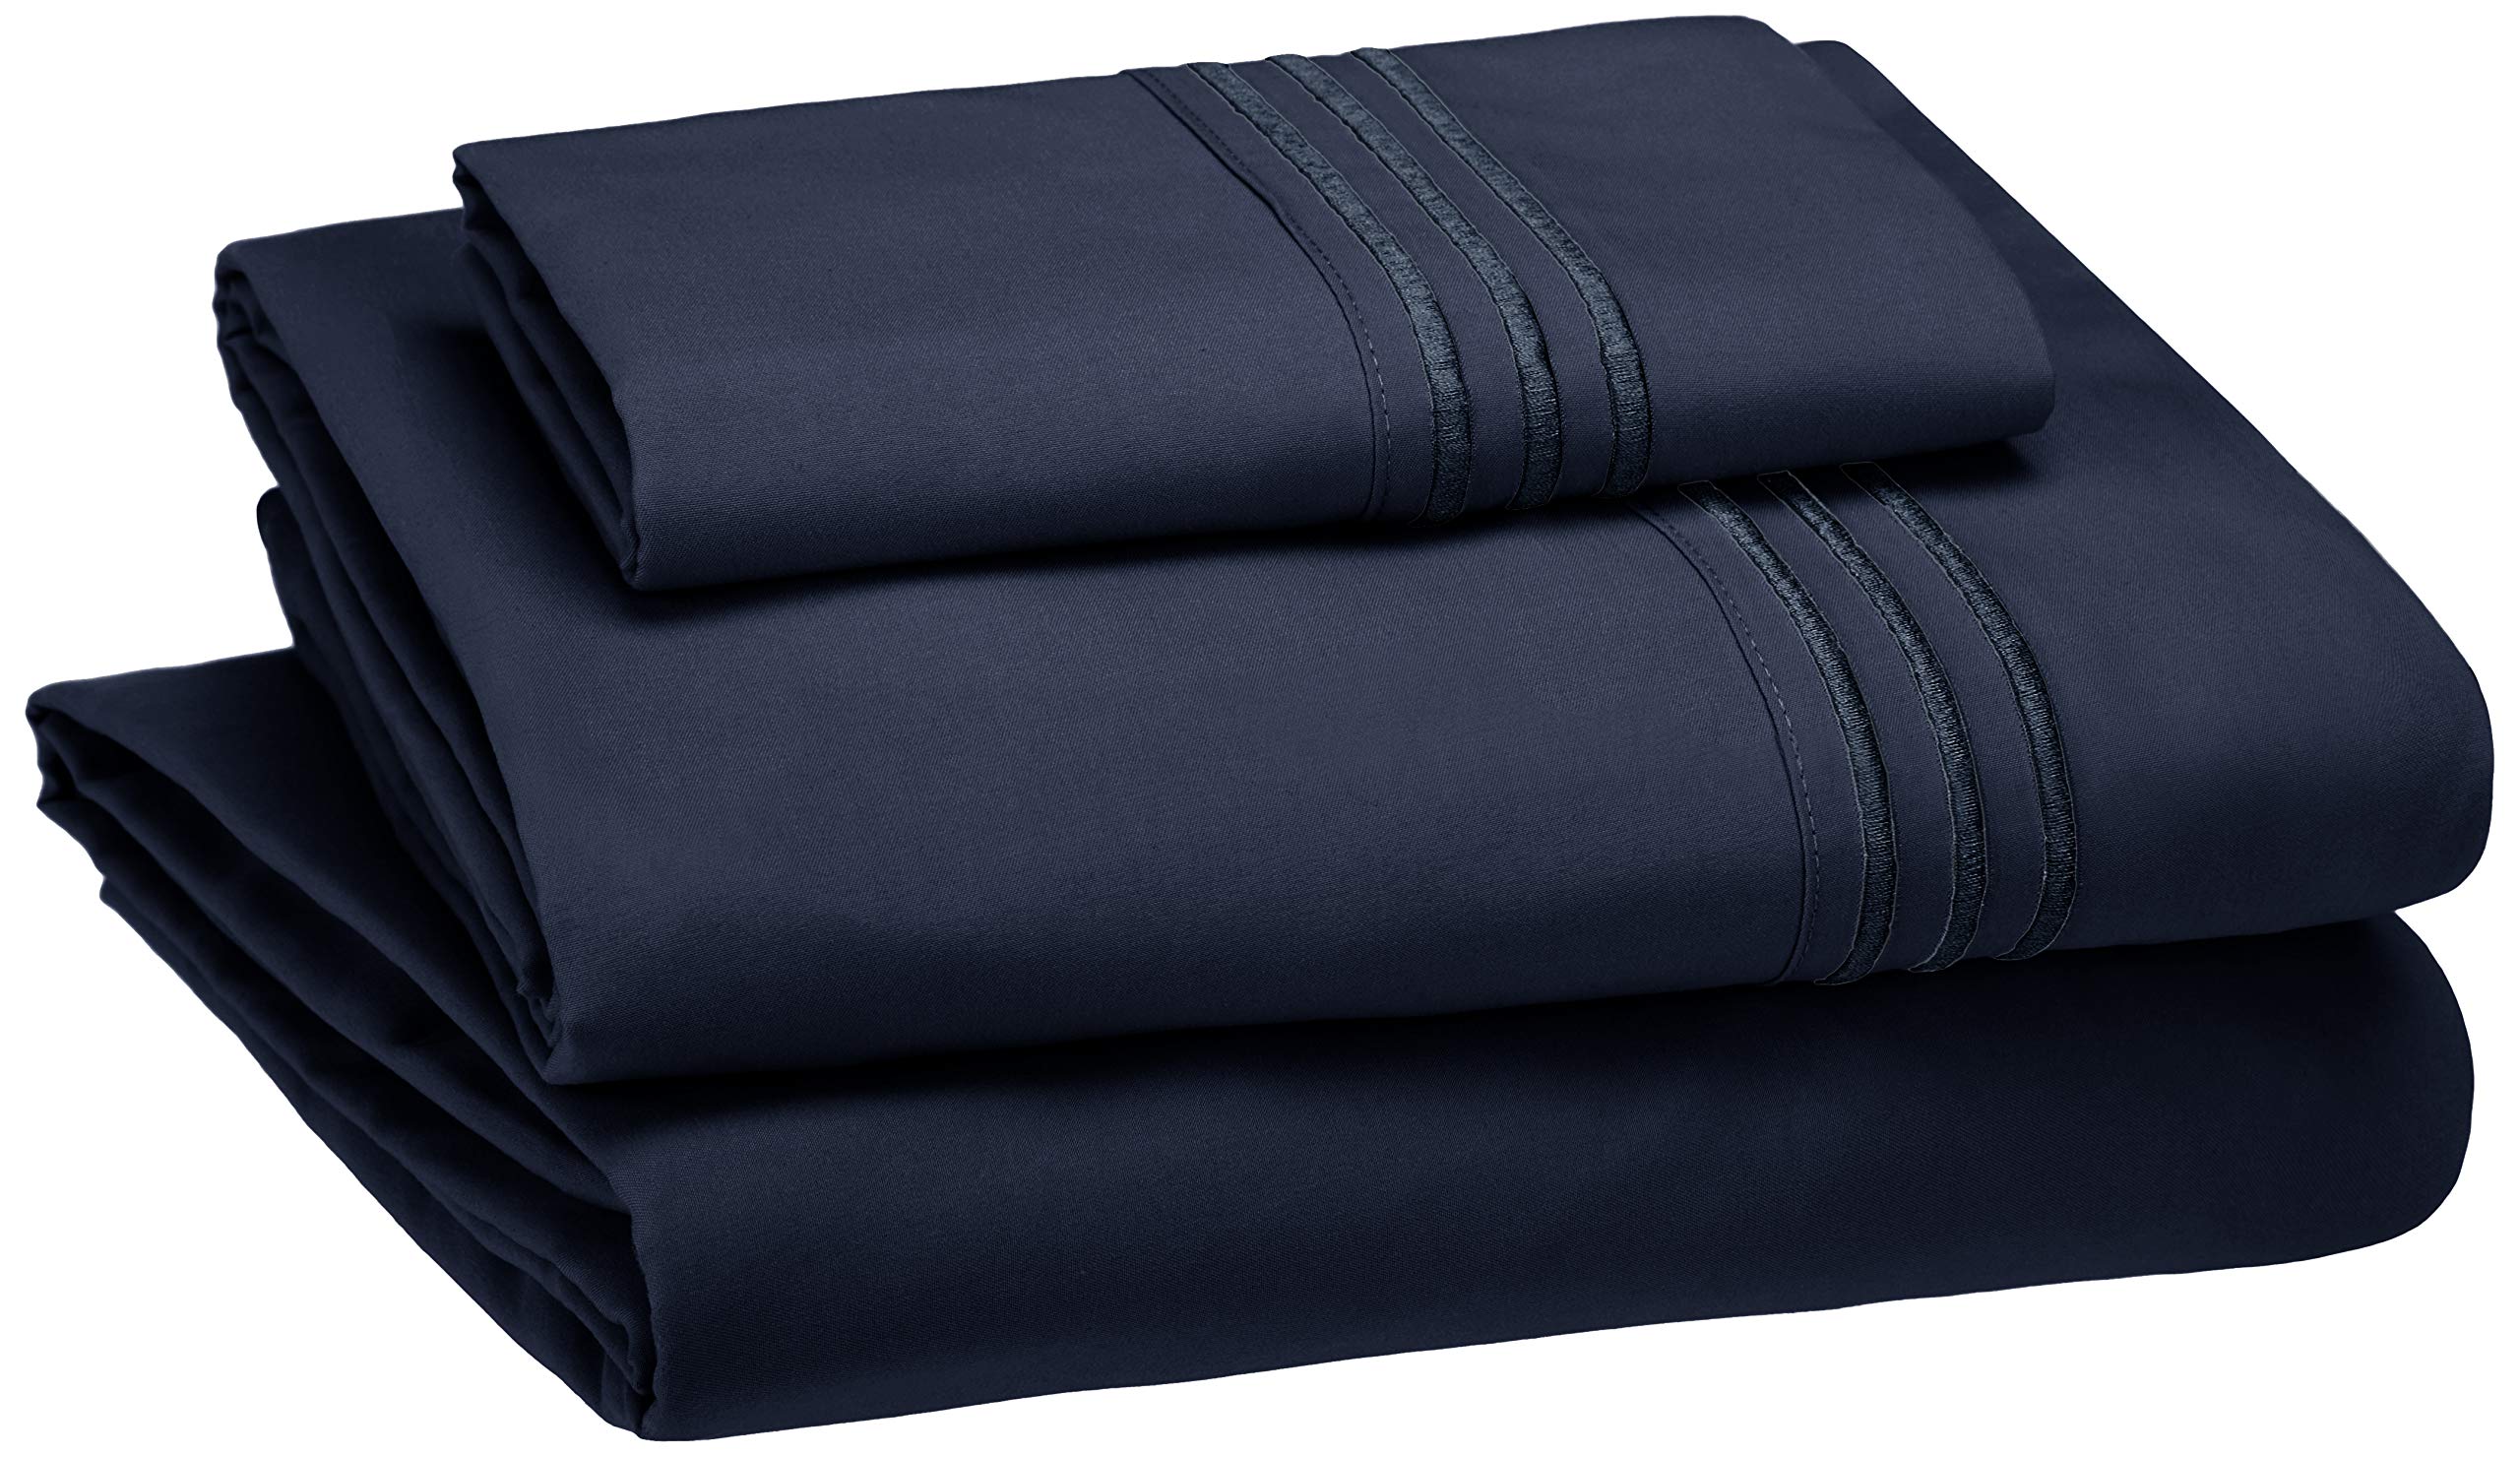 Book Cover Amazon Basics Easy-Wash Embroidered Hotel Stitch 120 GSM Sheet Set - Twin, Navy Blue Navy Blue Twin Sheet Set